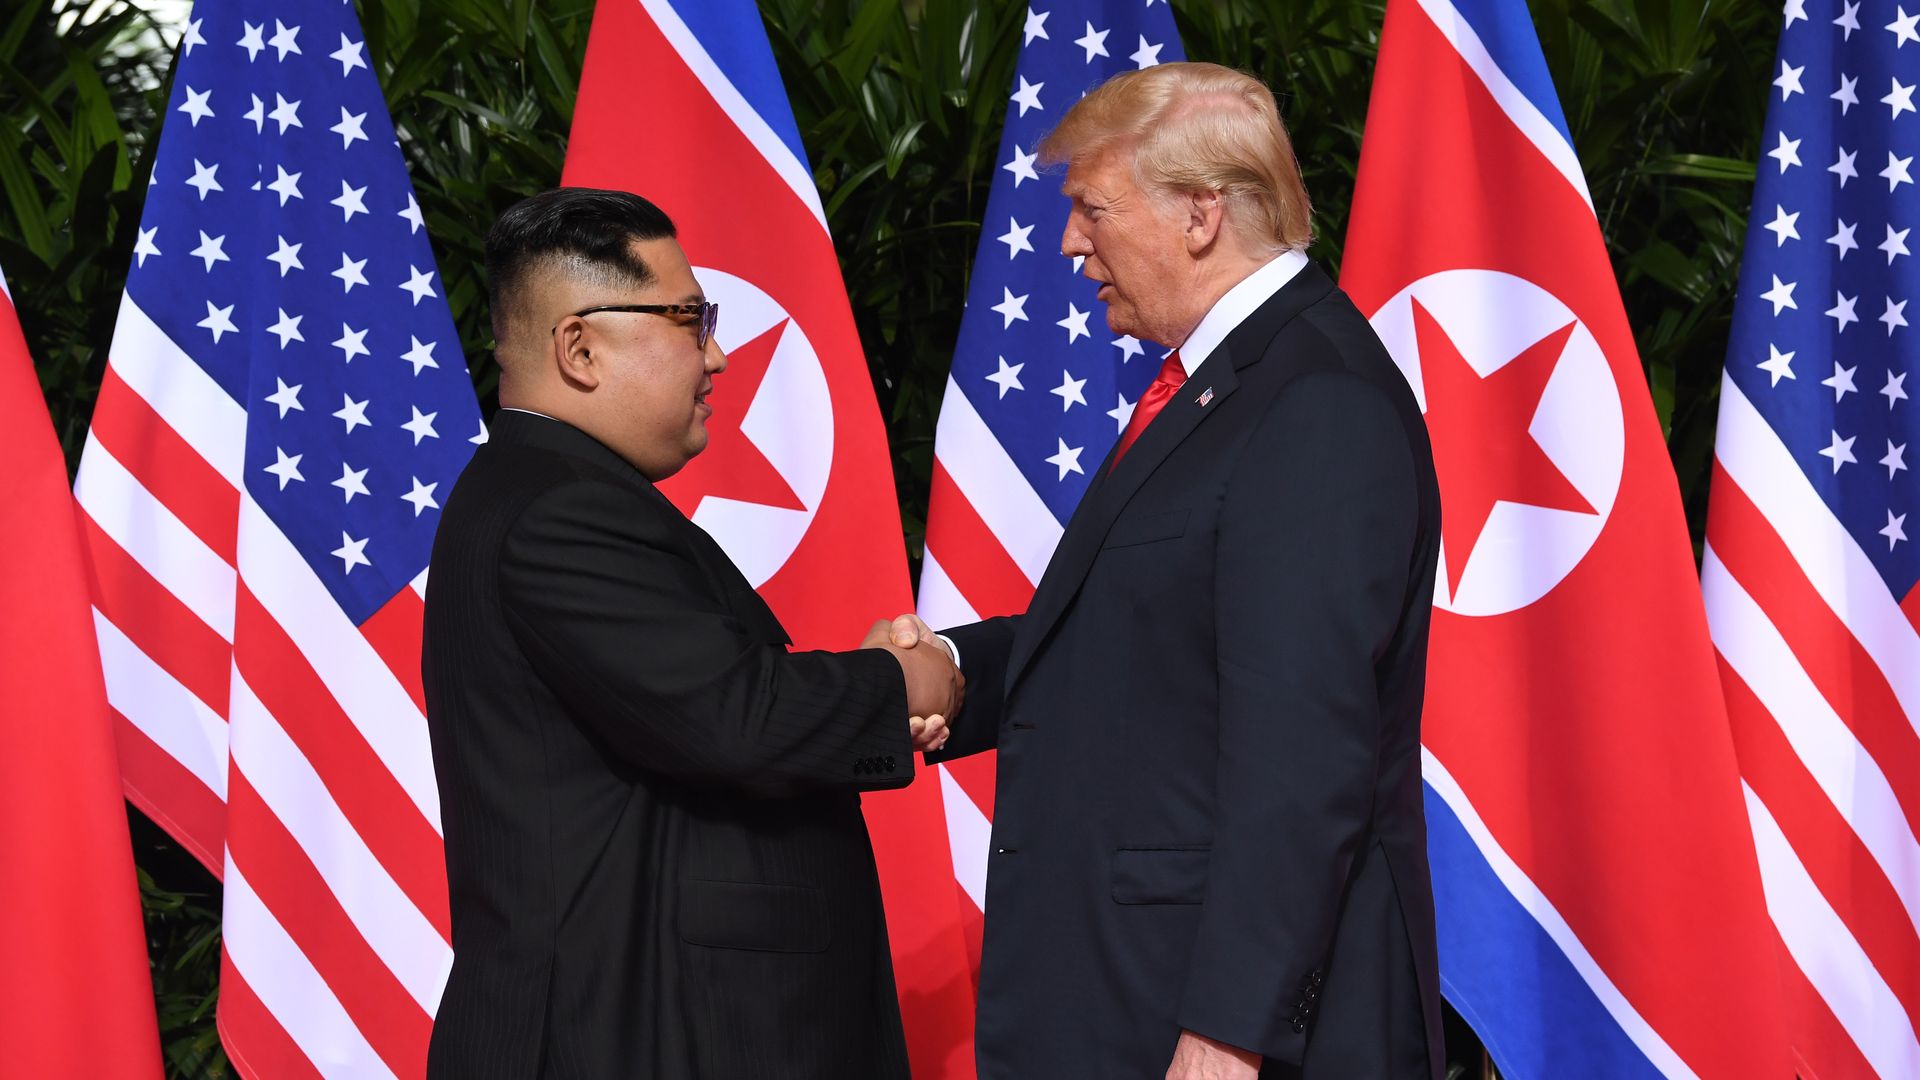 President Trump and North Korea's leader Kim Jong-un at their summit in Singapore on June 12, 2018. 